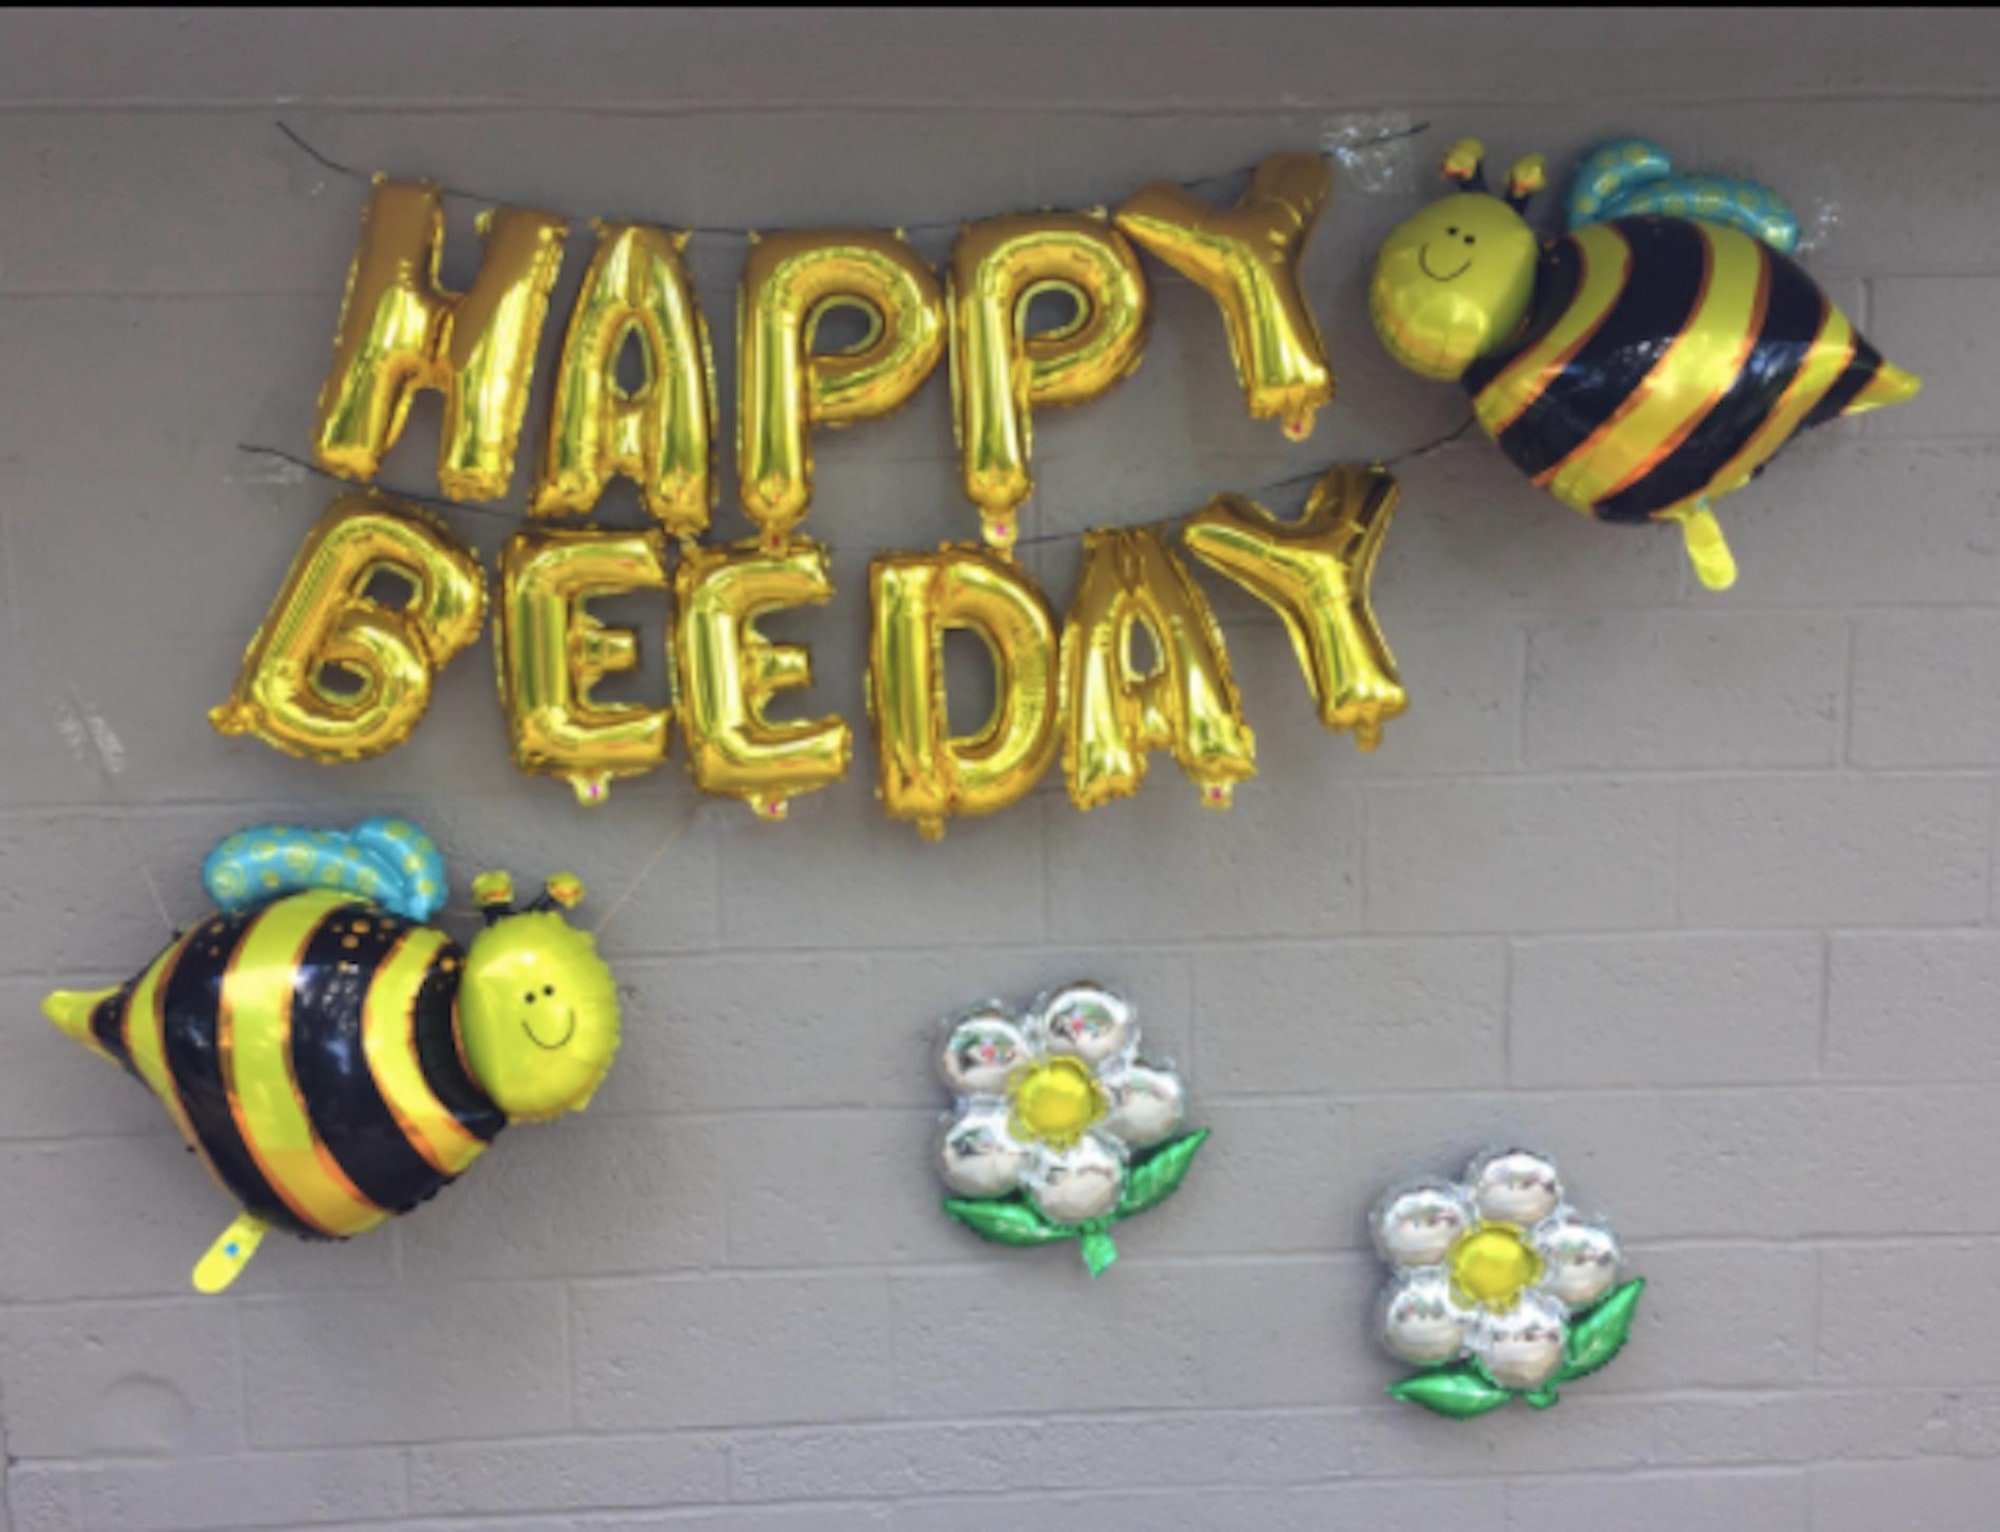 Large Happy Bee Day Banner - 19'' x 118'' Bumble Bee Birthday Party  Decorations for Kids 1st B-Day Honey Bee Party Supplies Big Fence Yard Sign